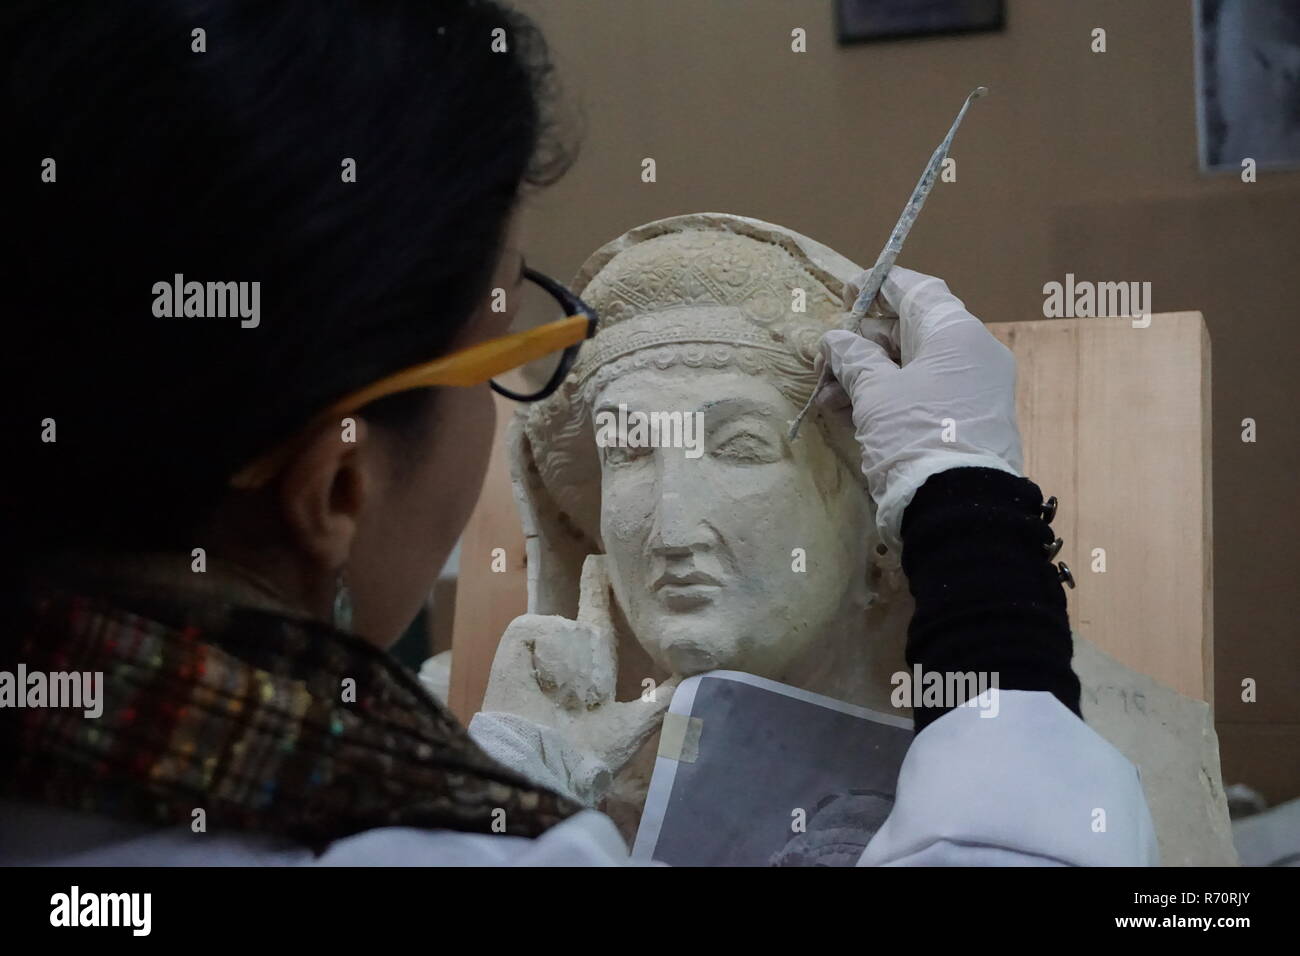 (181207) -- DAMASCUS, Dec. 7, 2018 (Xinhua) -- Heba Jouma, a conservator-restorer from the ancient city of Palmyra in Syria and a member of a Syrian restoration experts' team, works at the National Museum of Damascus in Damascus, Syria, on Dec. 5, 2018. Heba Jouma works to bring back ancient features to the sculptures damaged by the Islamic State (IS) group. The IS group had stormed Palmyra twice during the more than seven-year-long war, destroying precious archeological sites, such as temples and tombs, and shattering sculptures into pieces in the ancient oasis city, which is registered by th Stock Photo